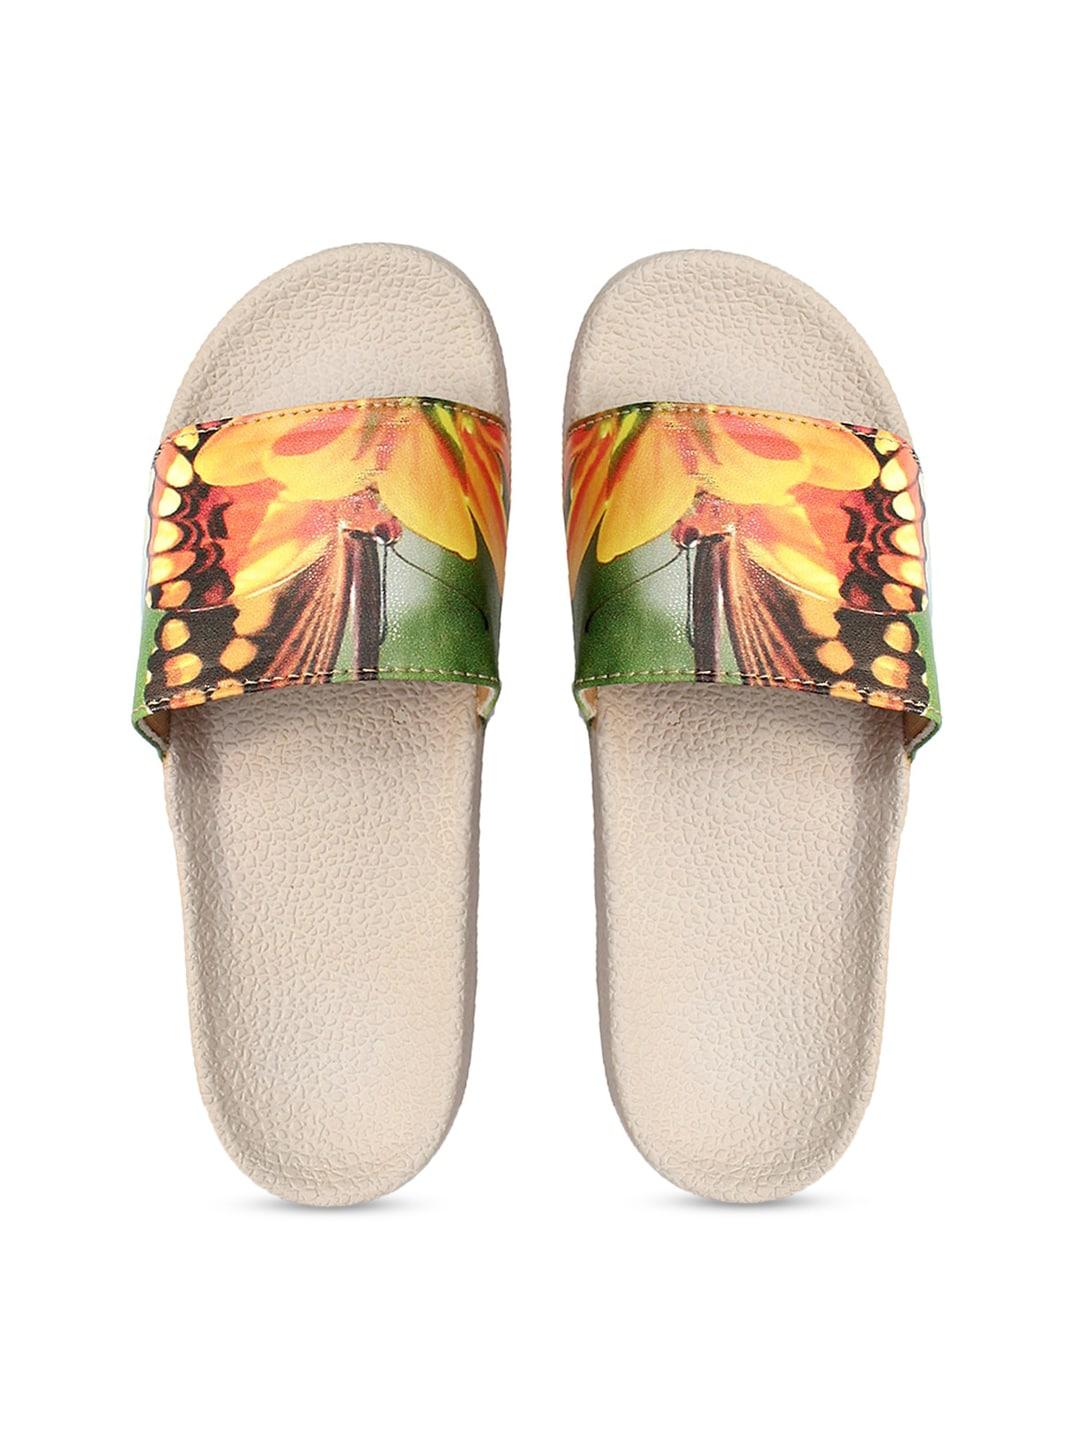 freeco women yellow butterfly printed sliders